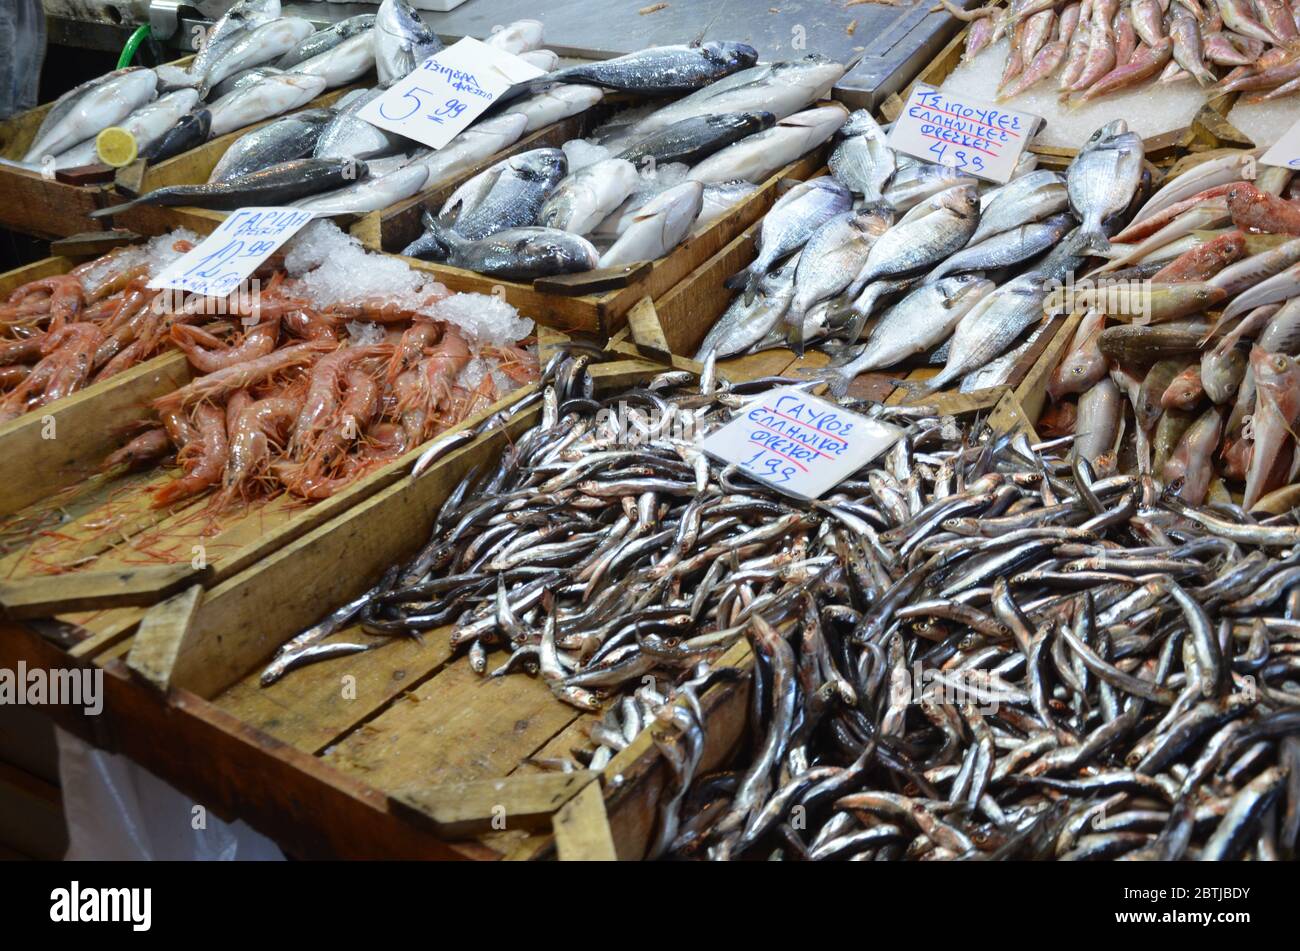 A stall that selling various kind of fishes and seafood at Athens market. Stock Photo